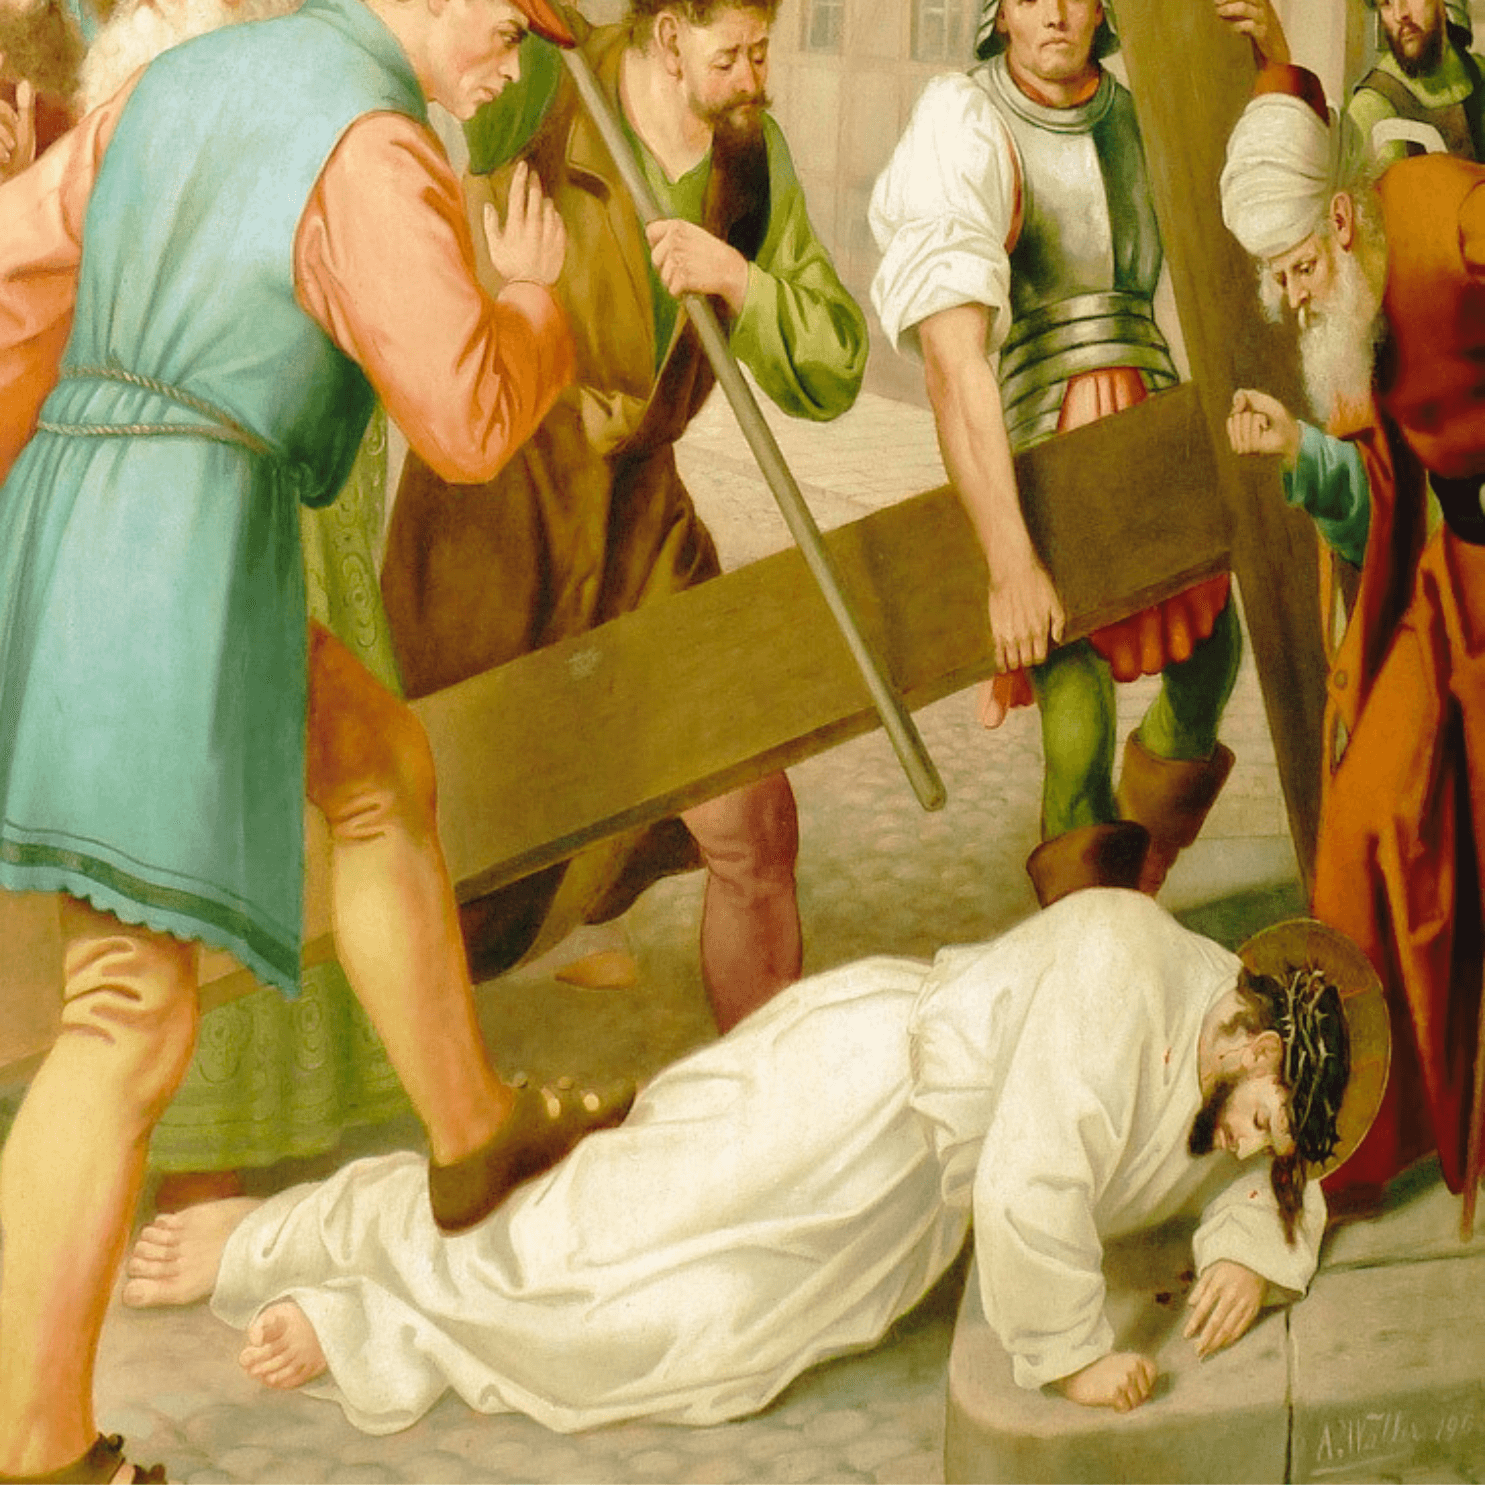 The Way of the Cross Third Station: Jesus Falls the First Time